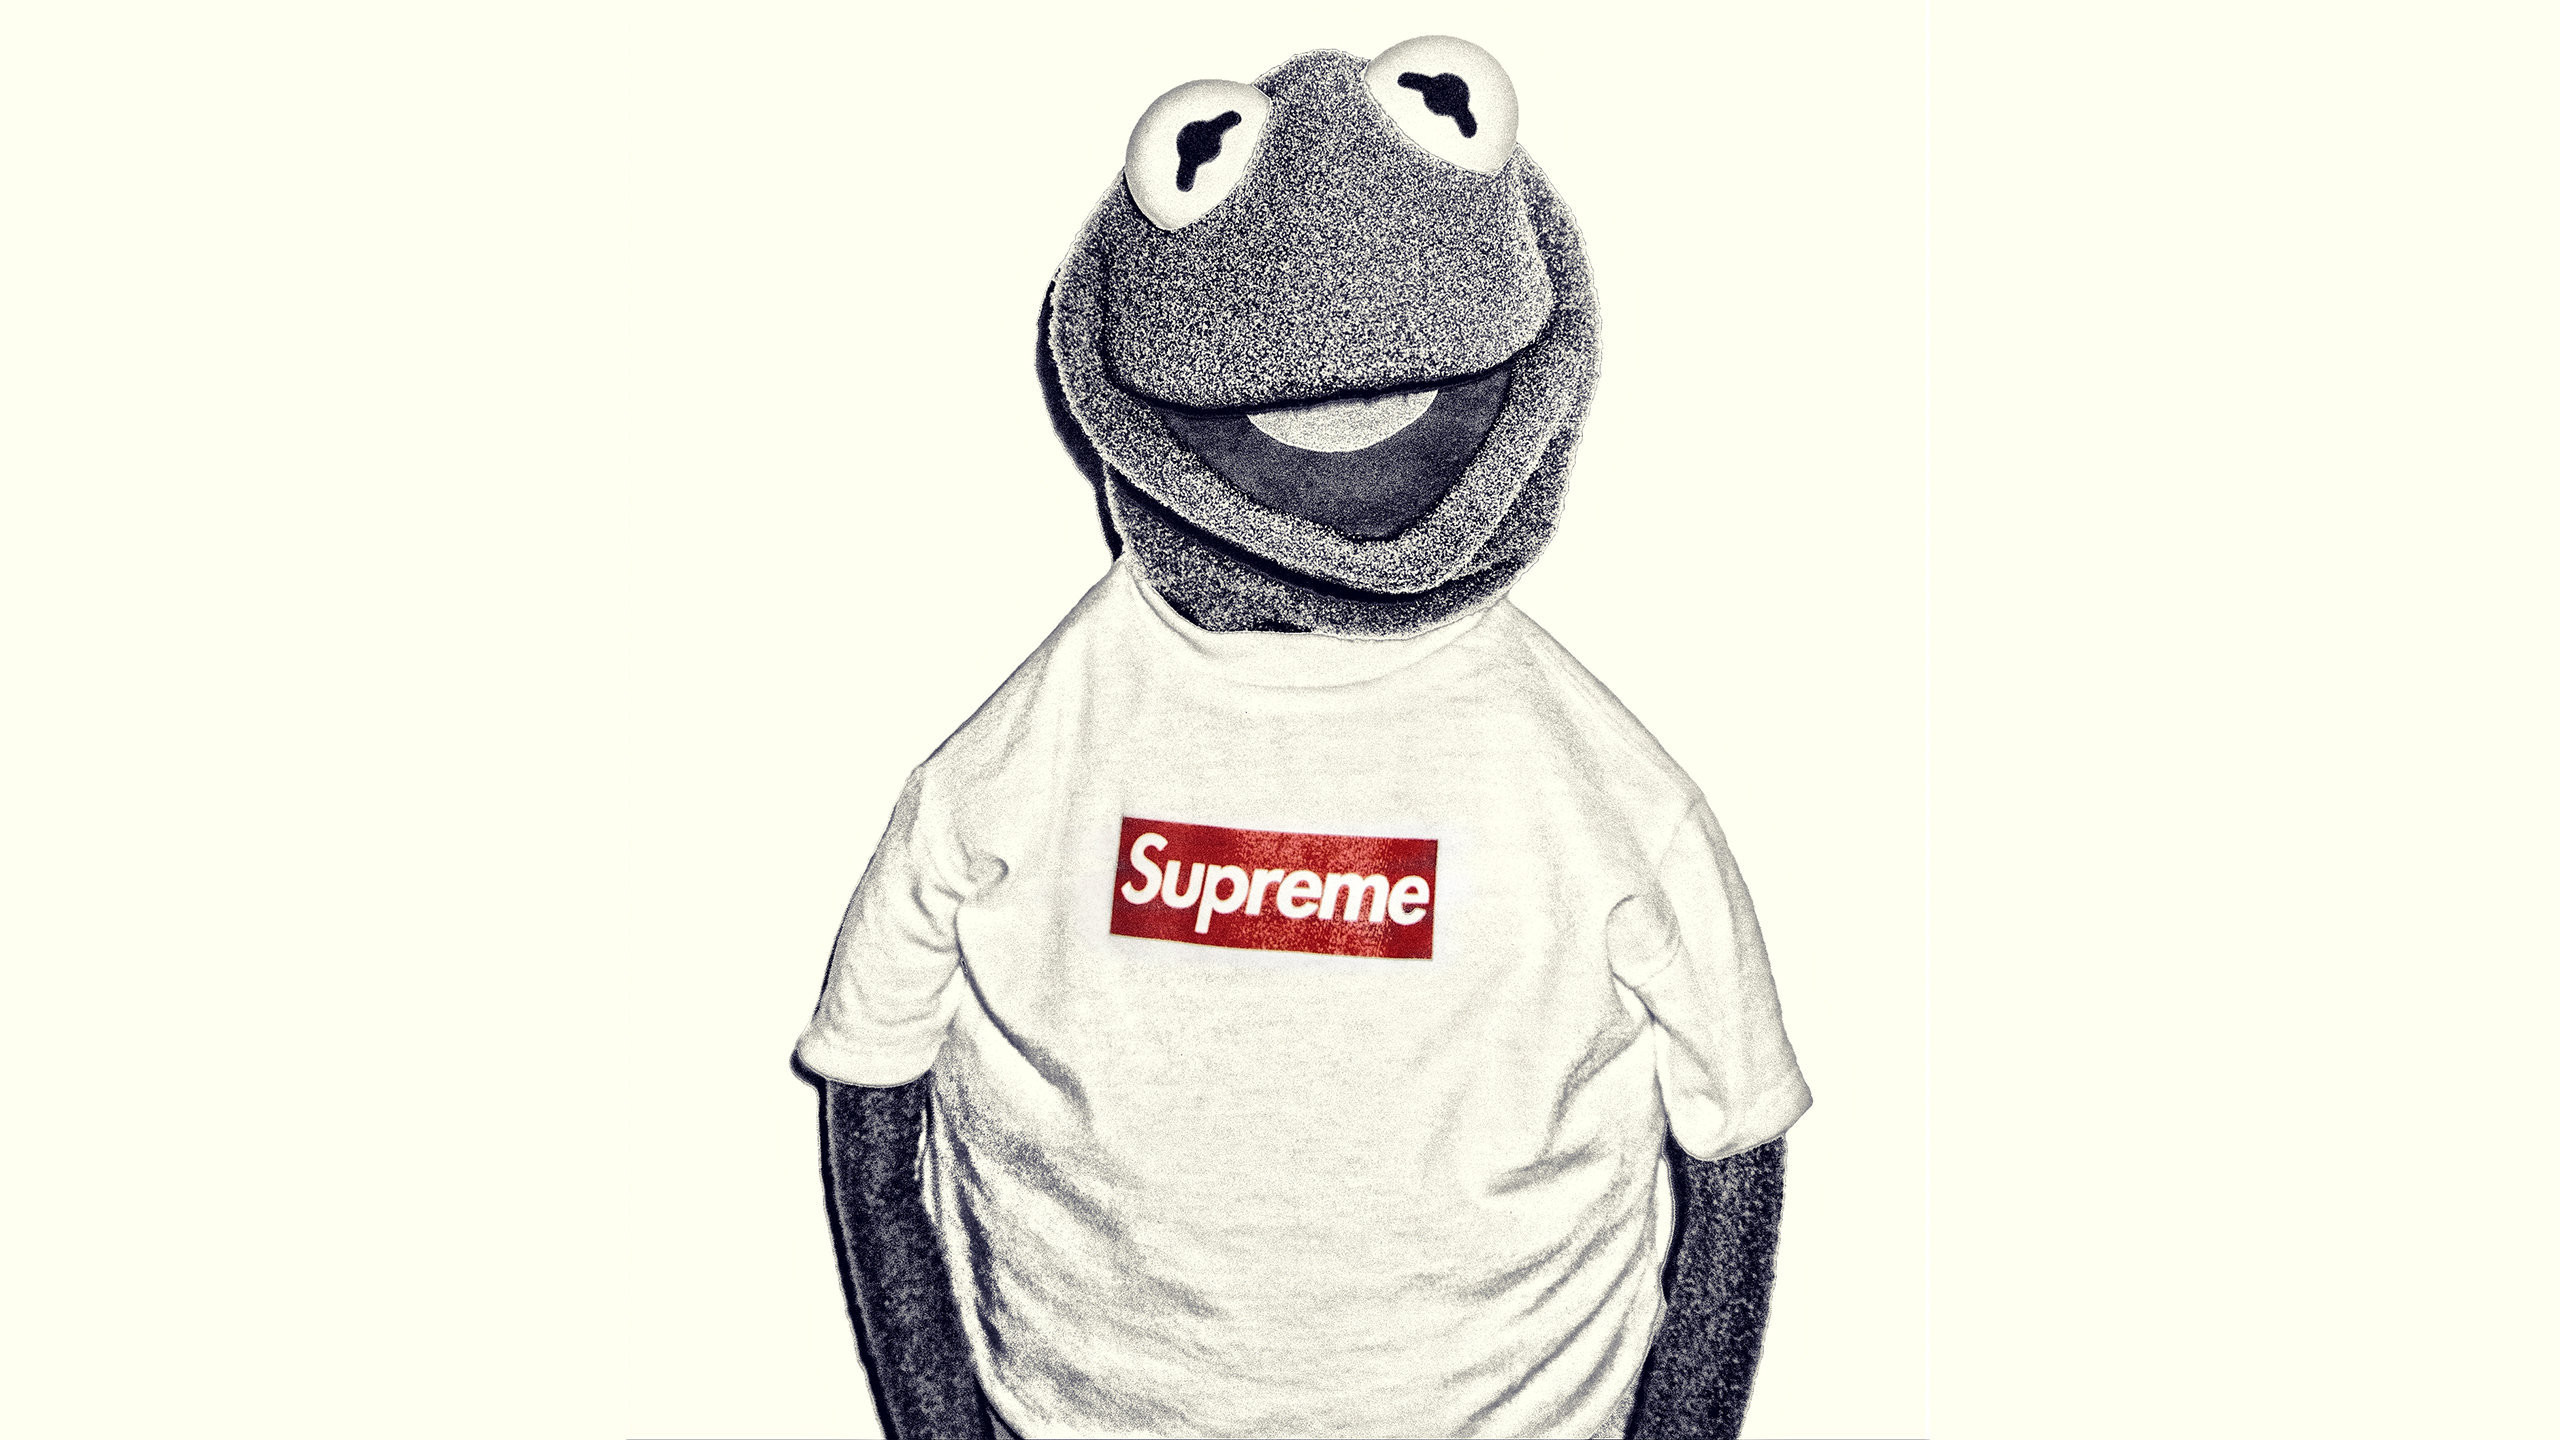 2560x1440 Download the Kermit Supreme wallpaper below for your mobile device (Android  phones, iPhone etc.)